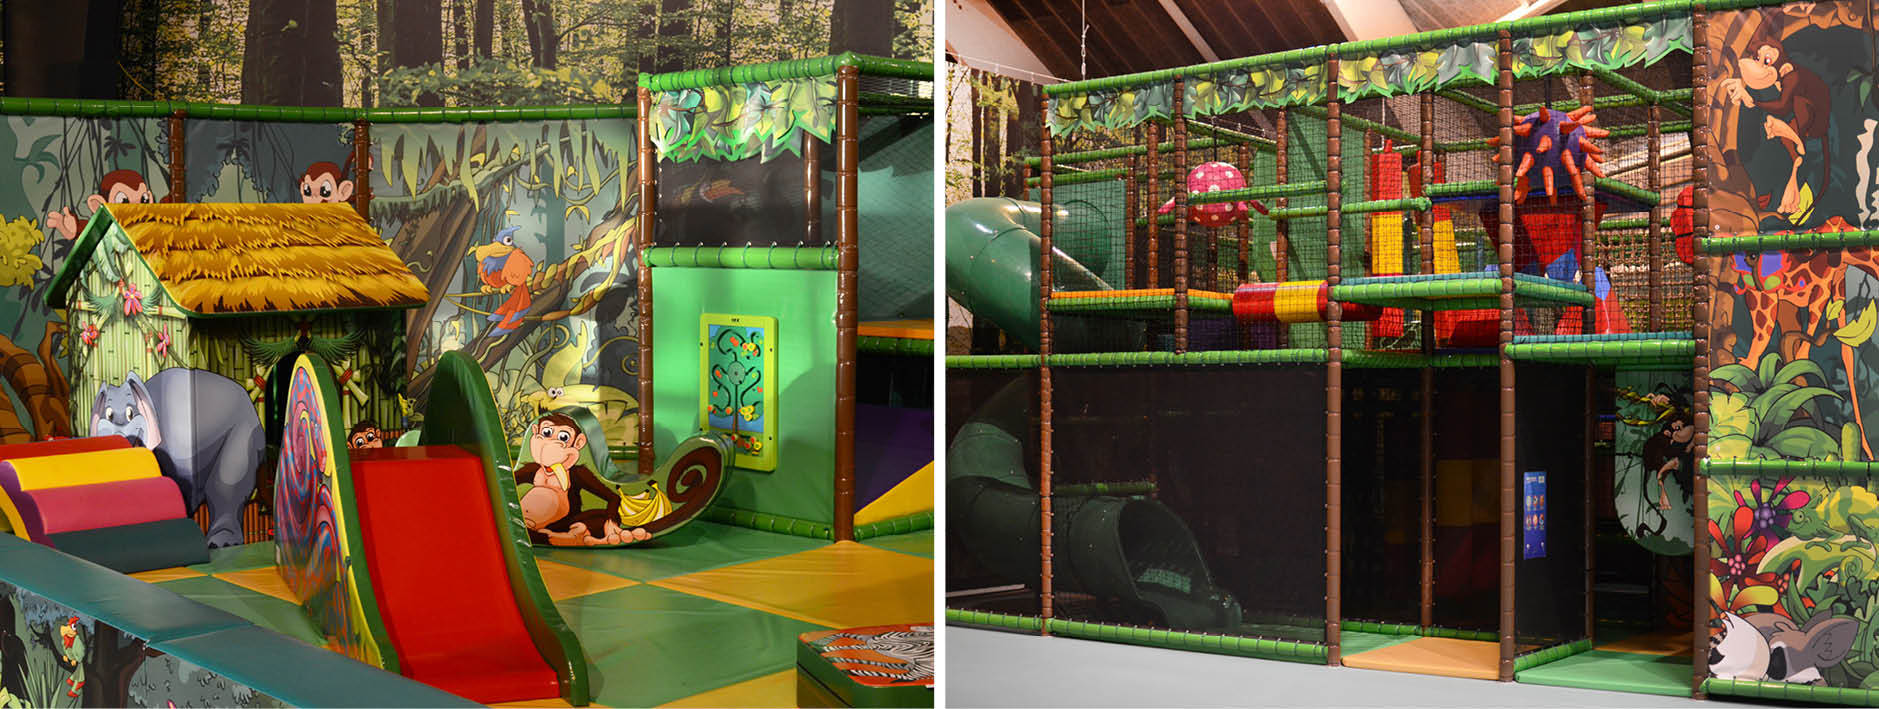 Soft play and play structure